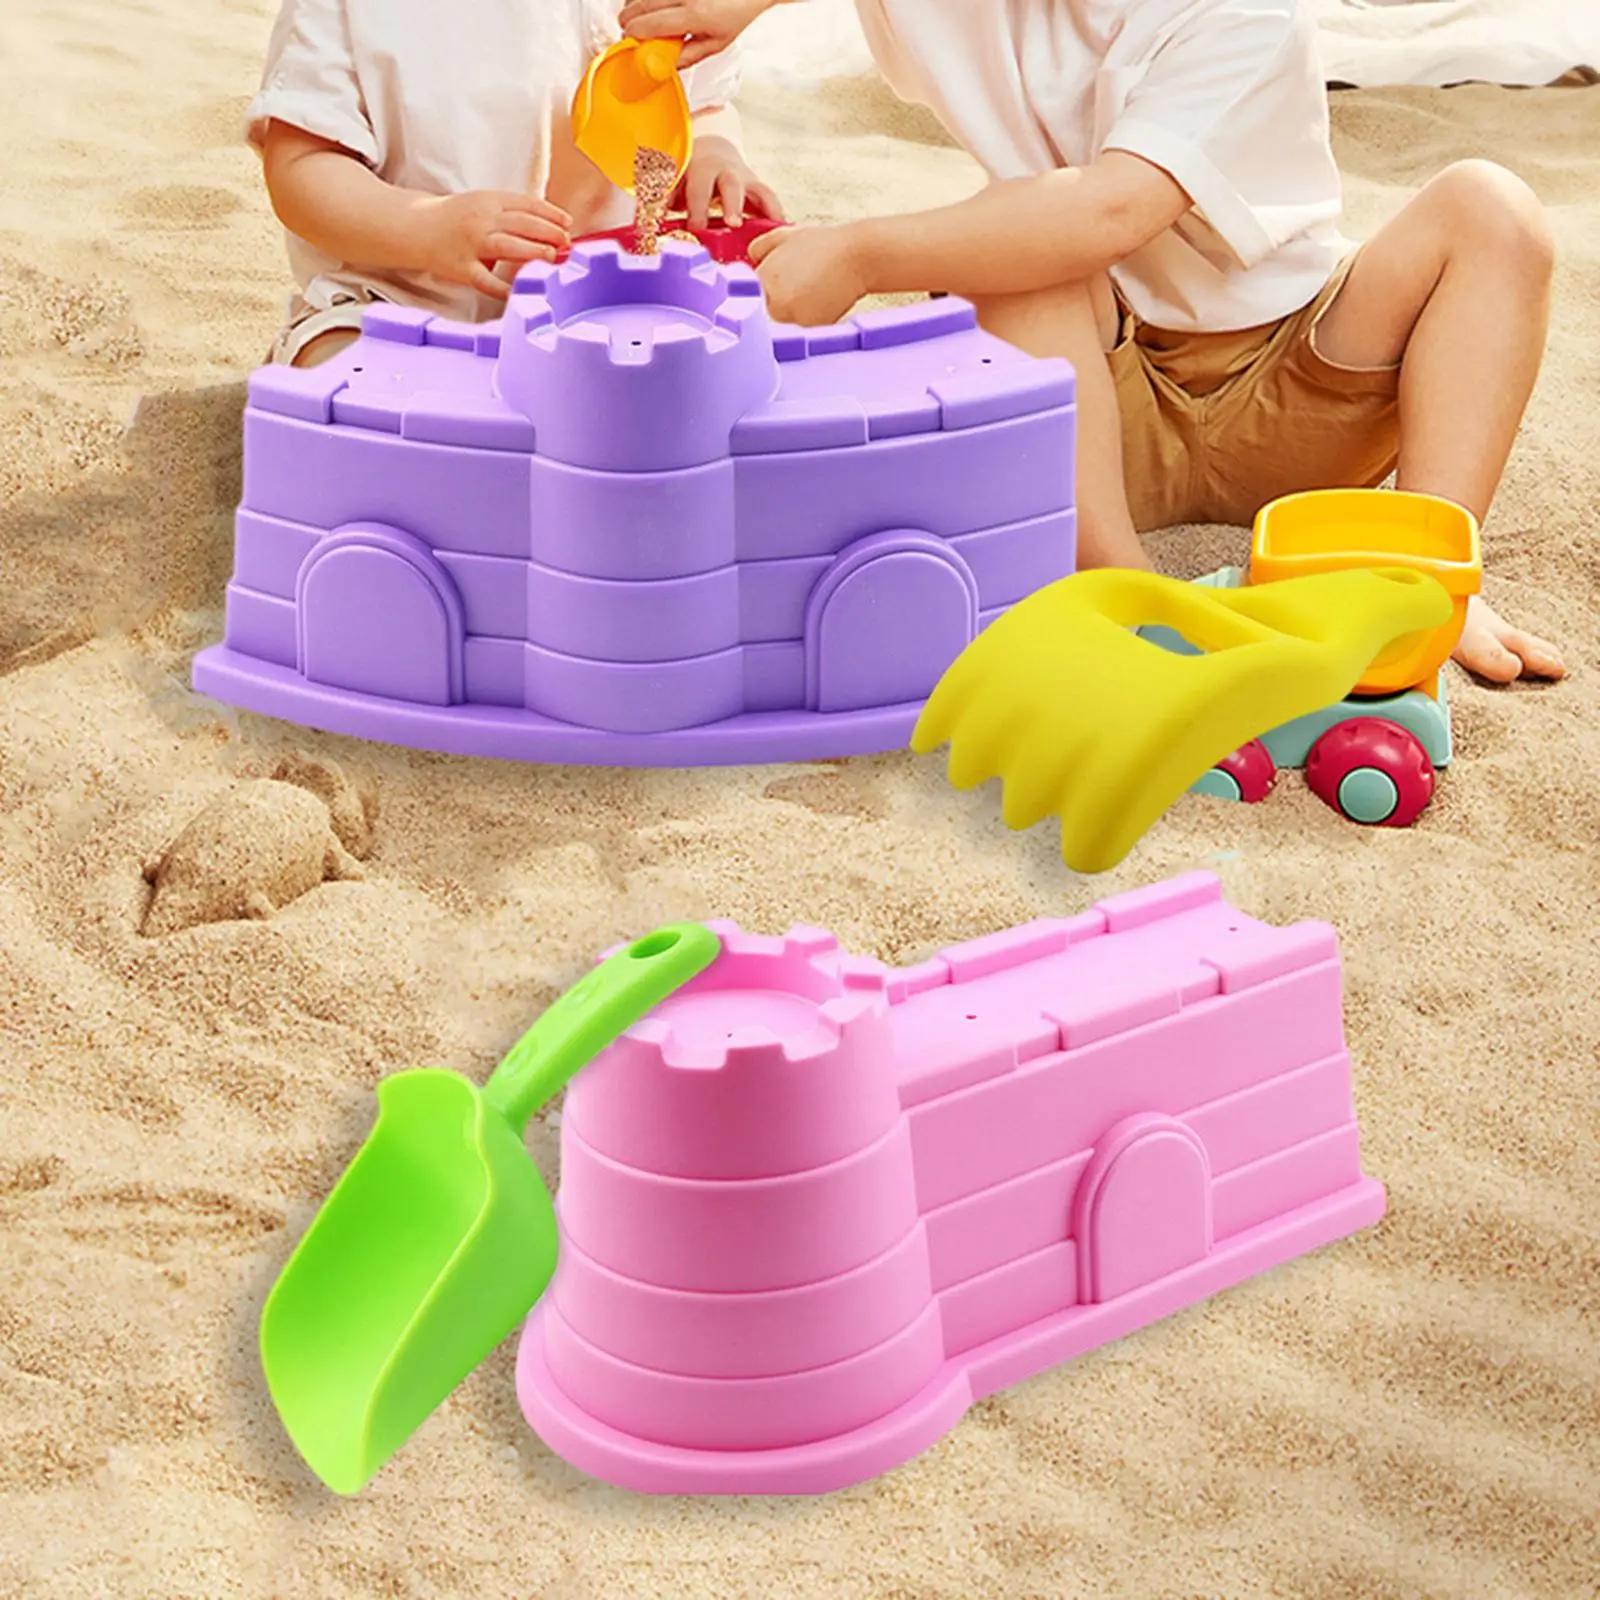 Sand or Beach Castle Making Set for Kids Beach Accessory Interactive Toy Sand Castle Models for Children Boys Girls Outdoor